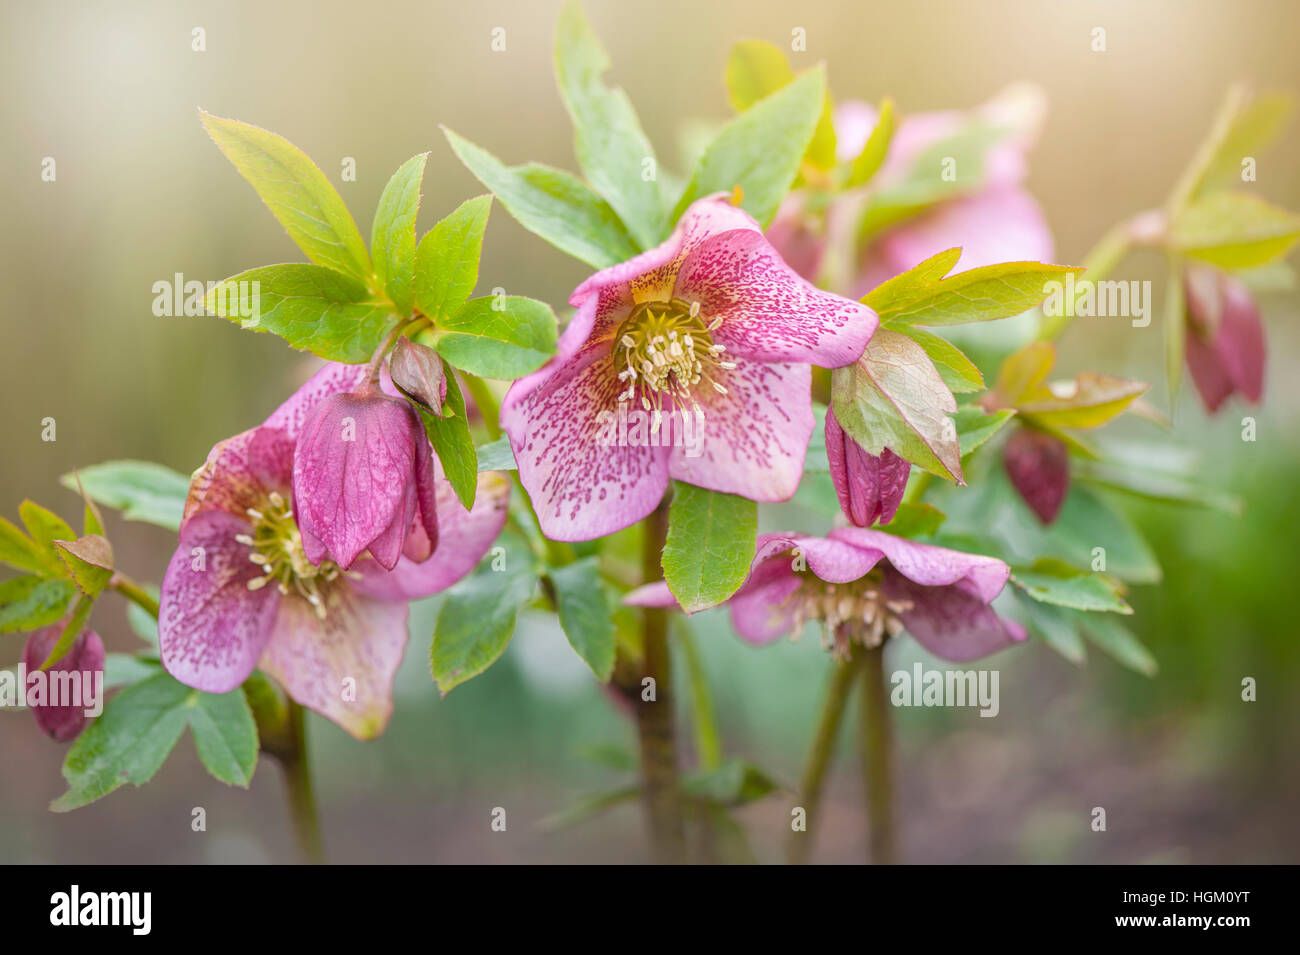 Spring flowering pink Hellebore flowers also known as Lenten rose or Christmas rose,. Stock Photo